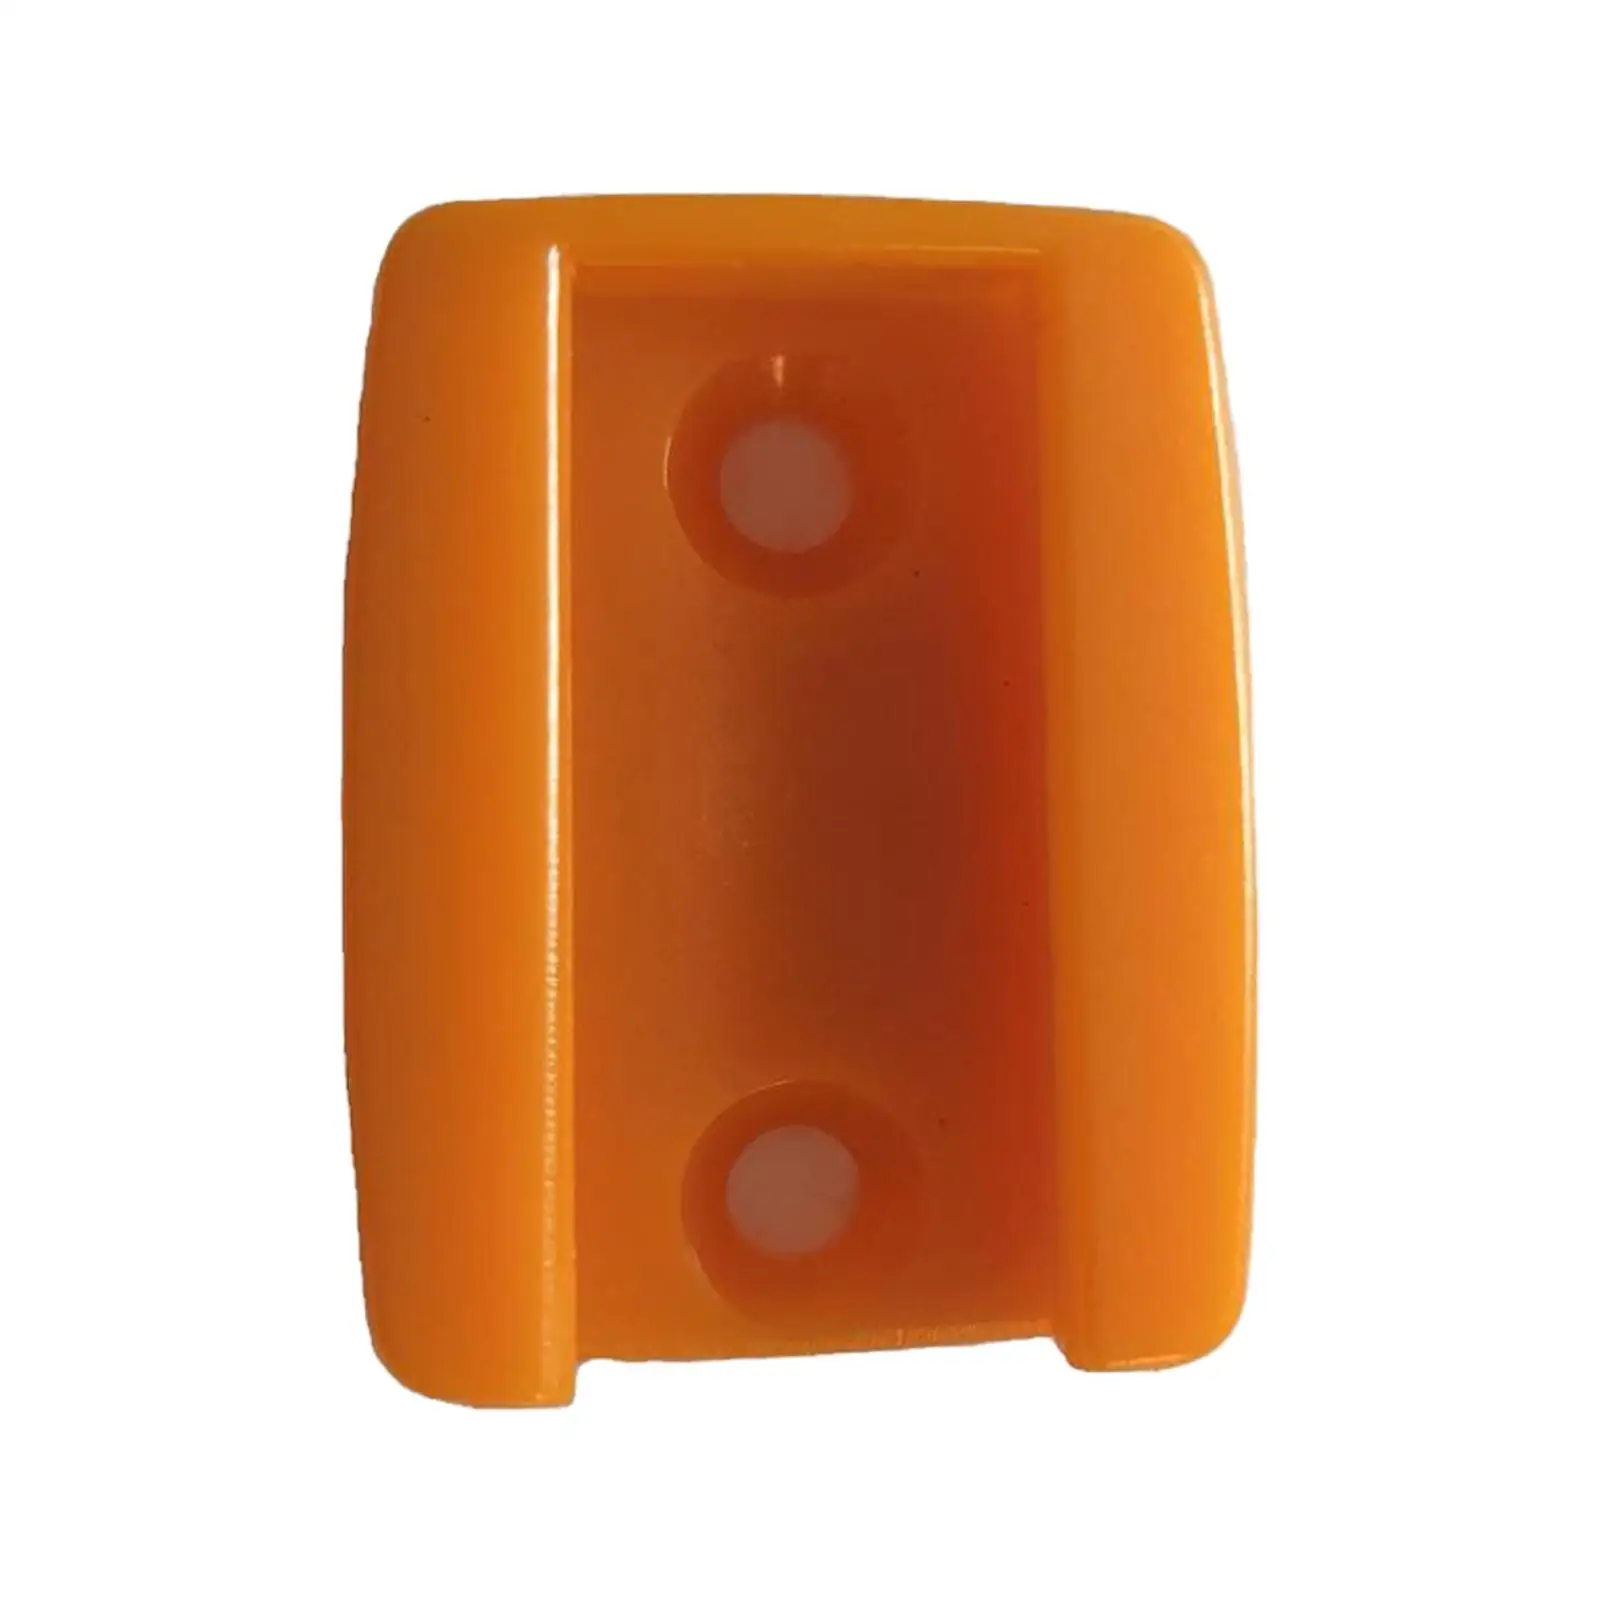 Orange Machine Spare Parts Holder Commercial and Electric Juicer Parts Support Electric Orange Juicer Parts for XC-2000E